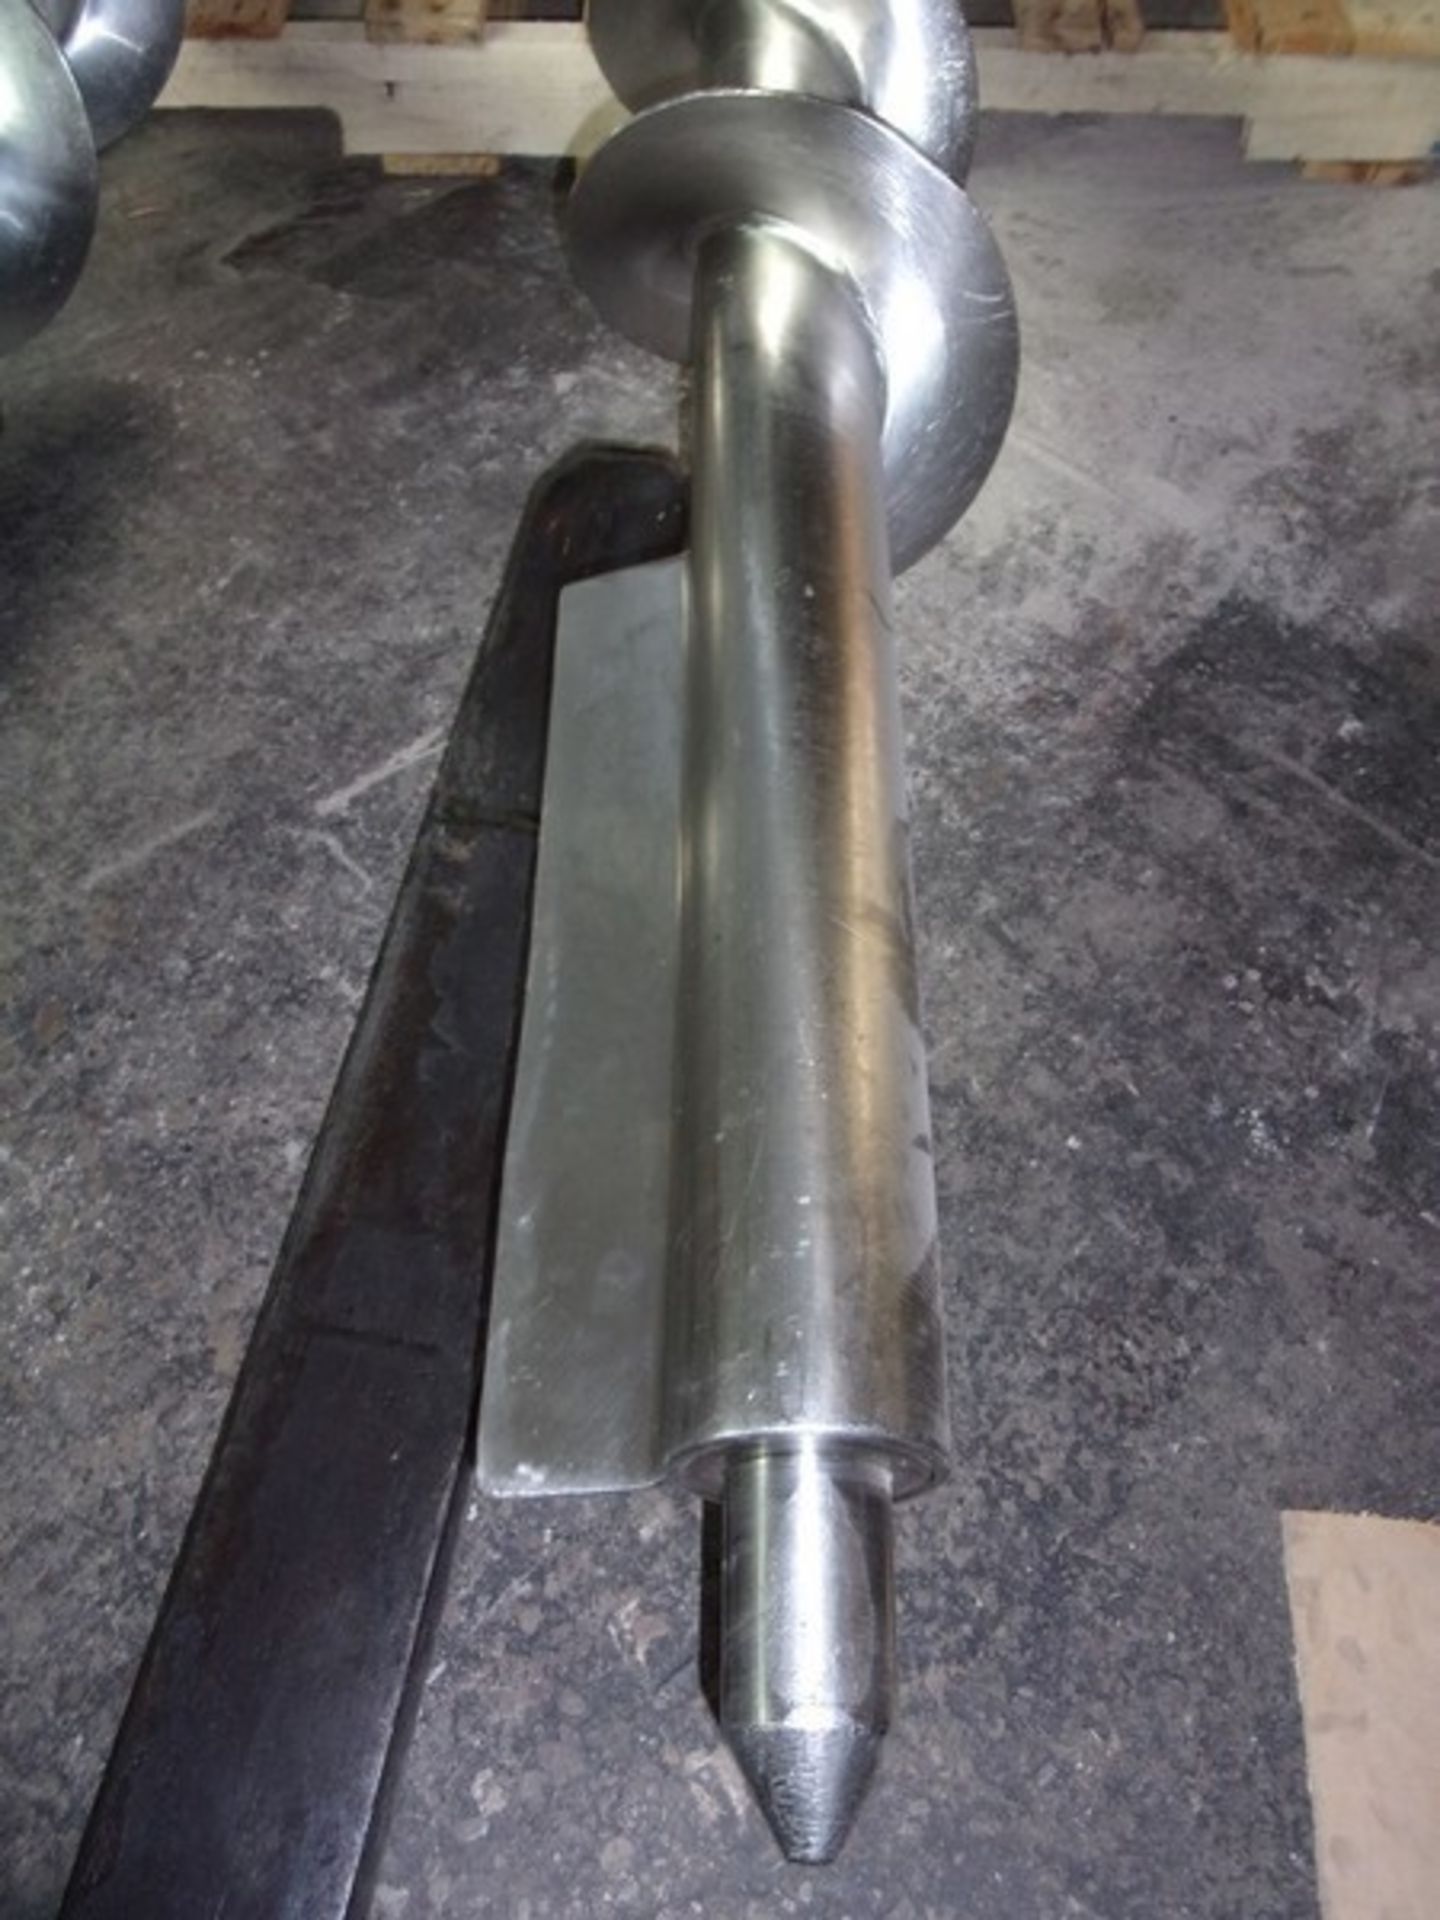 (3) 9" Dia. S/S Screw Augers x 115" Overall, Screw Part is 84" L, 3-1/2" Dia. Shaft, 9" Between - Image 3 of 9